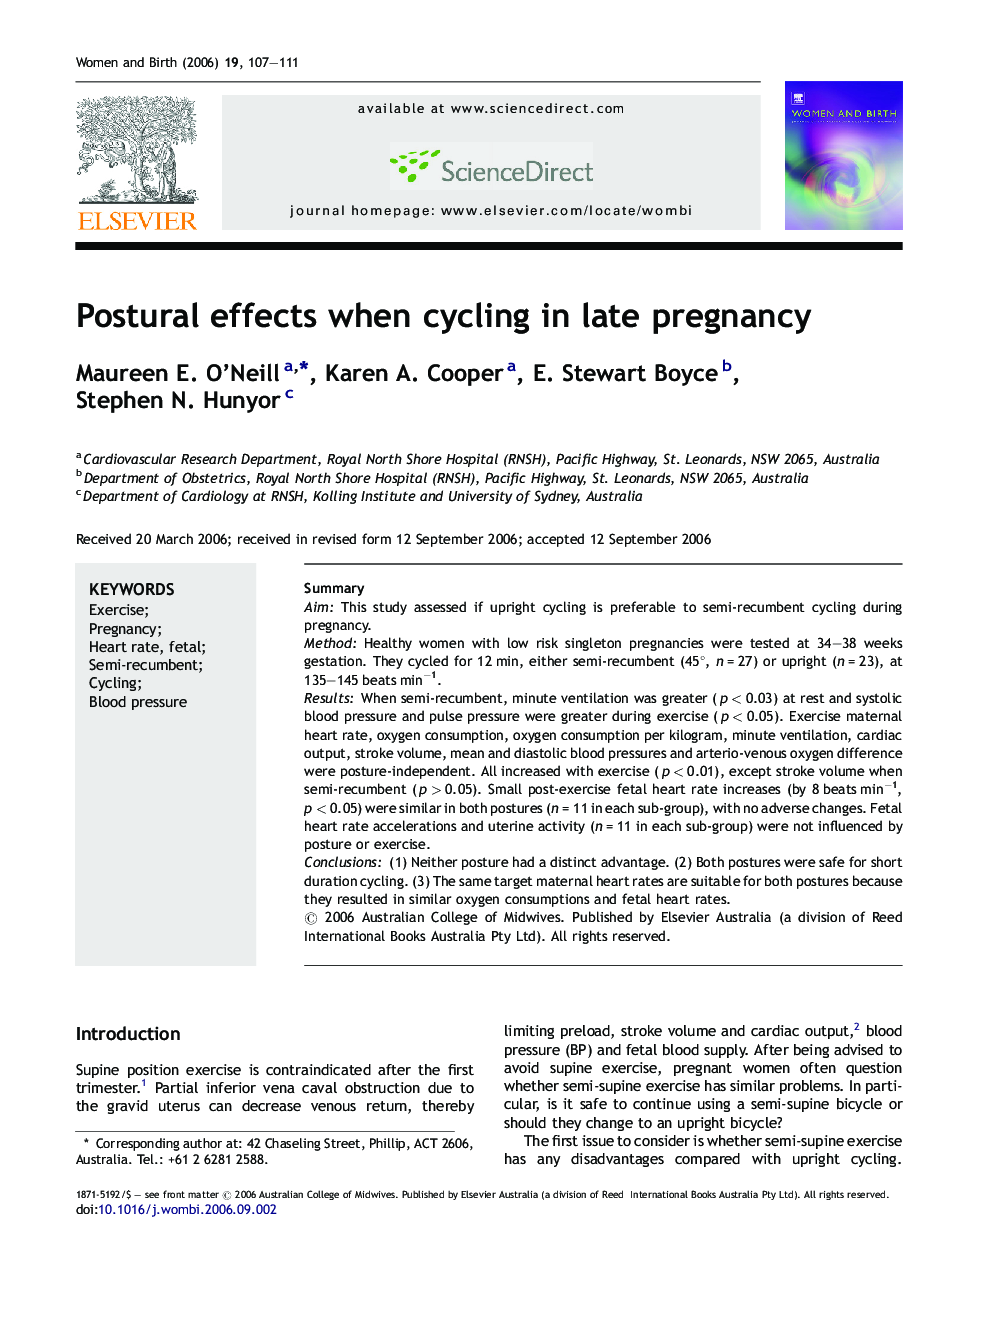 Postural effects when cycling in late pregnancy